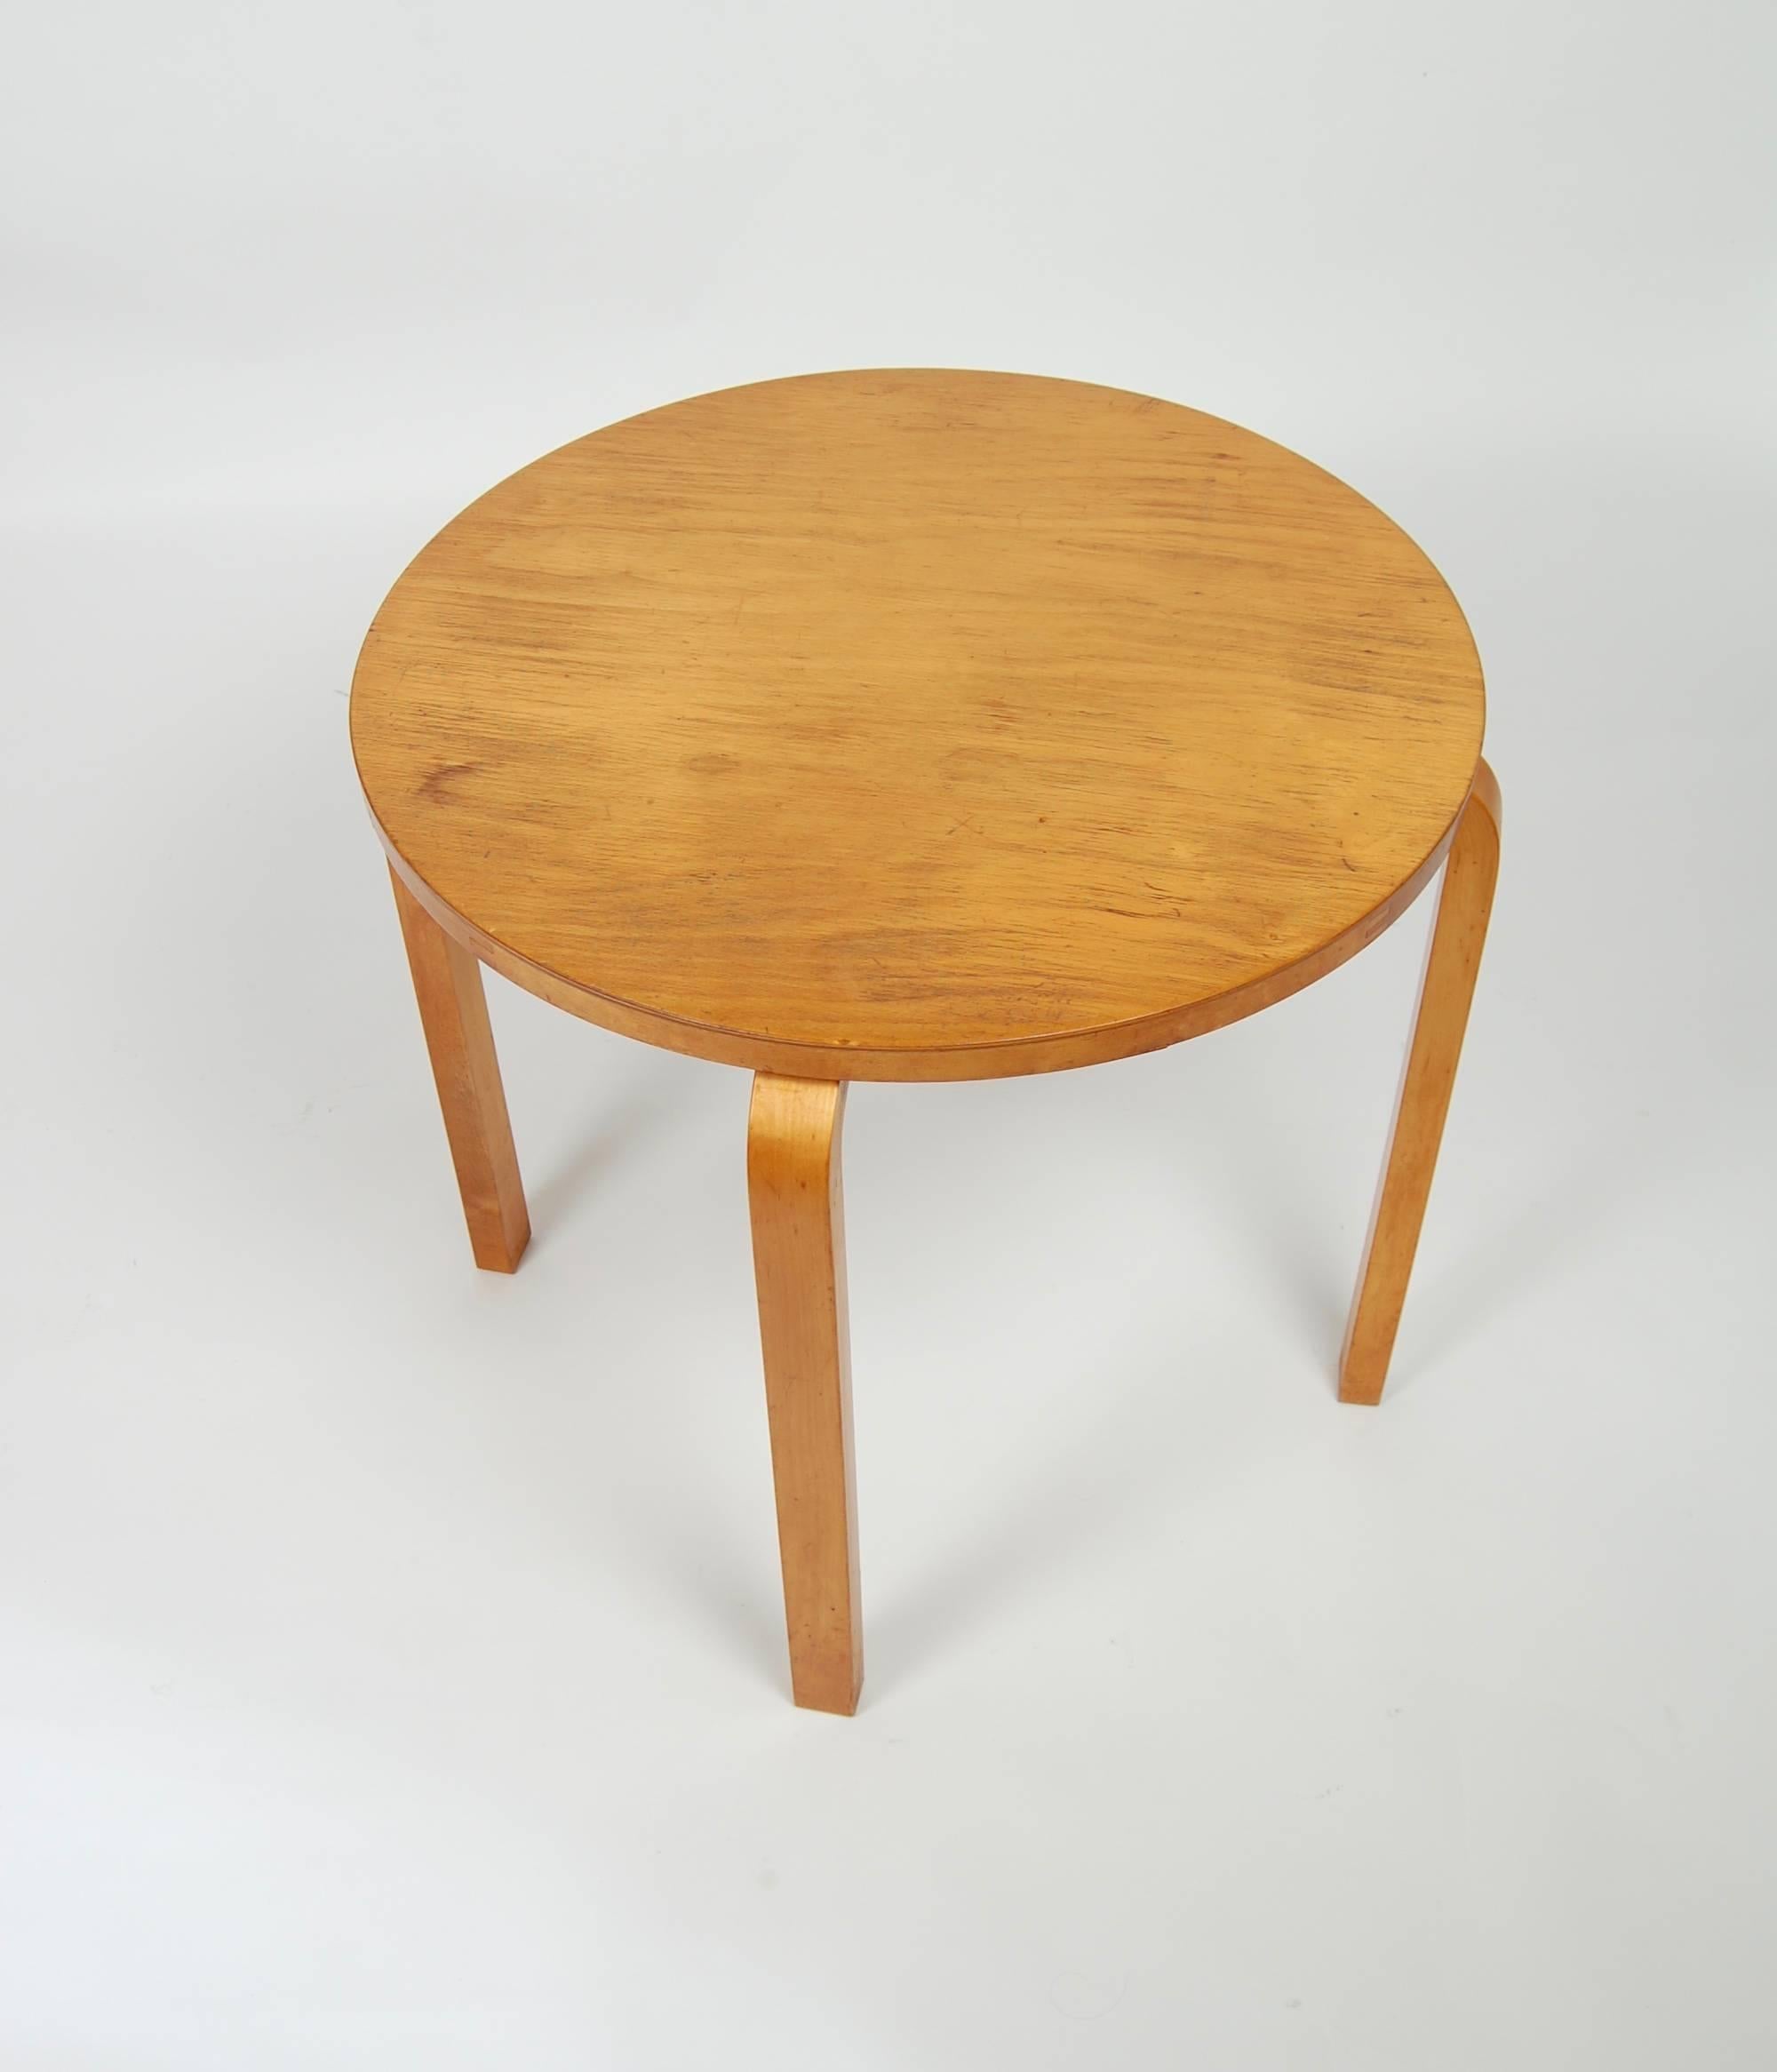 Designed in the 1930s and produced into the 1940s is this series 70 Alvar Aalto side table. Constructed of laminated birch with bent wood legs from Aalto's early design career. Great patina to the surfaces and in unusually good condition for a piece